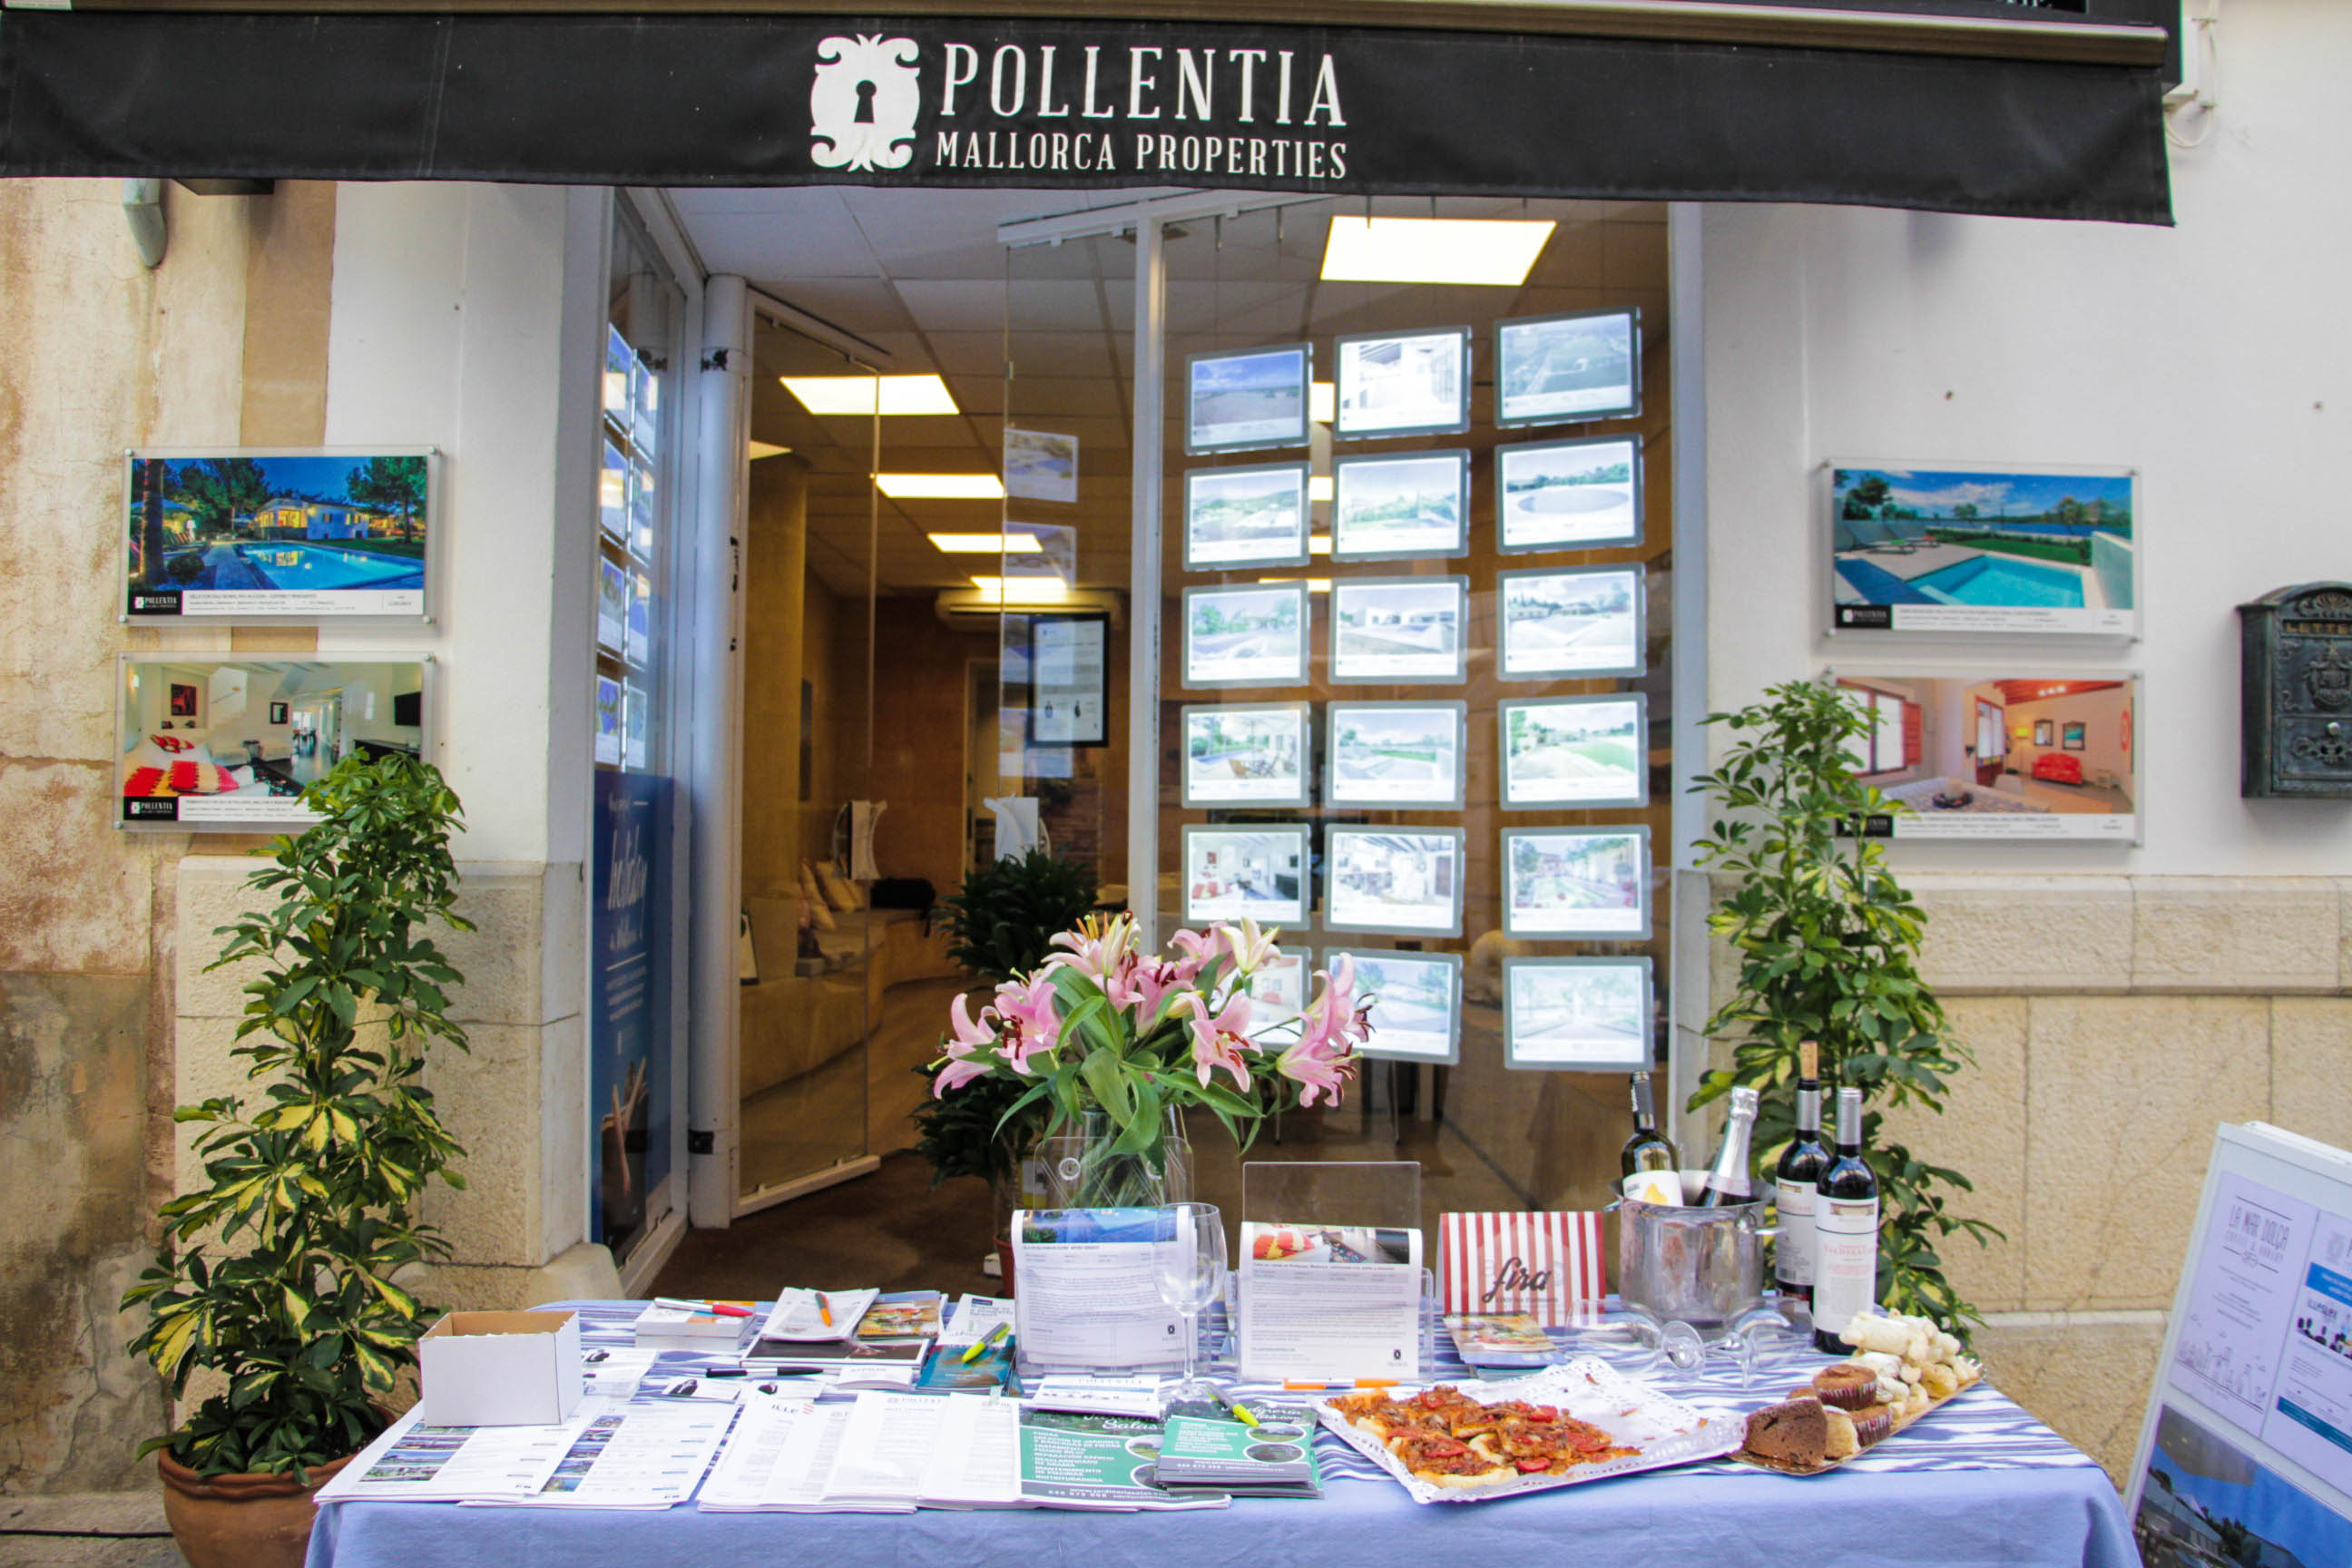 Our real estate agency in Pollensa wishes "Molts d'anys per la fira!"